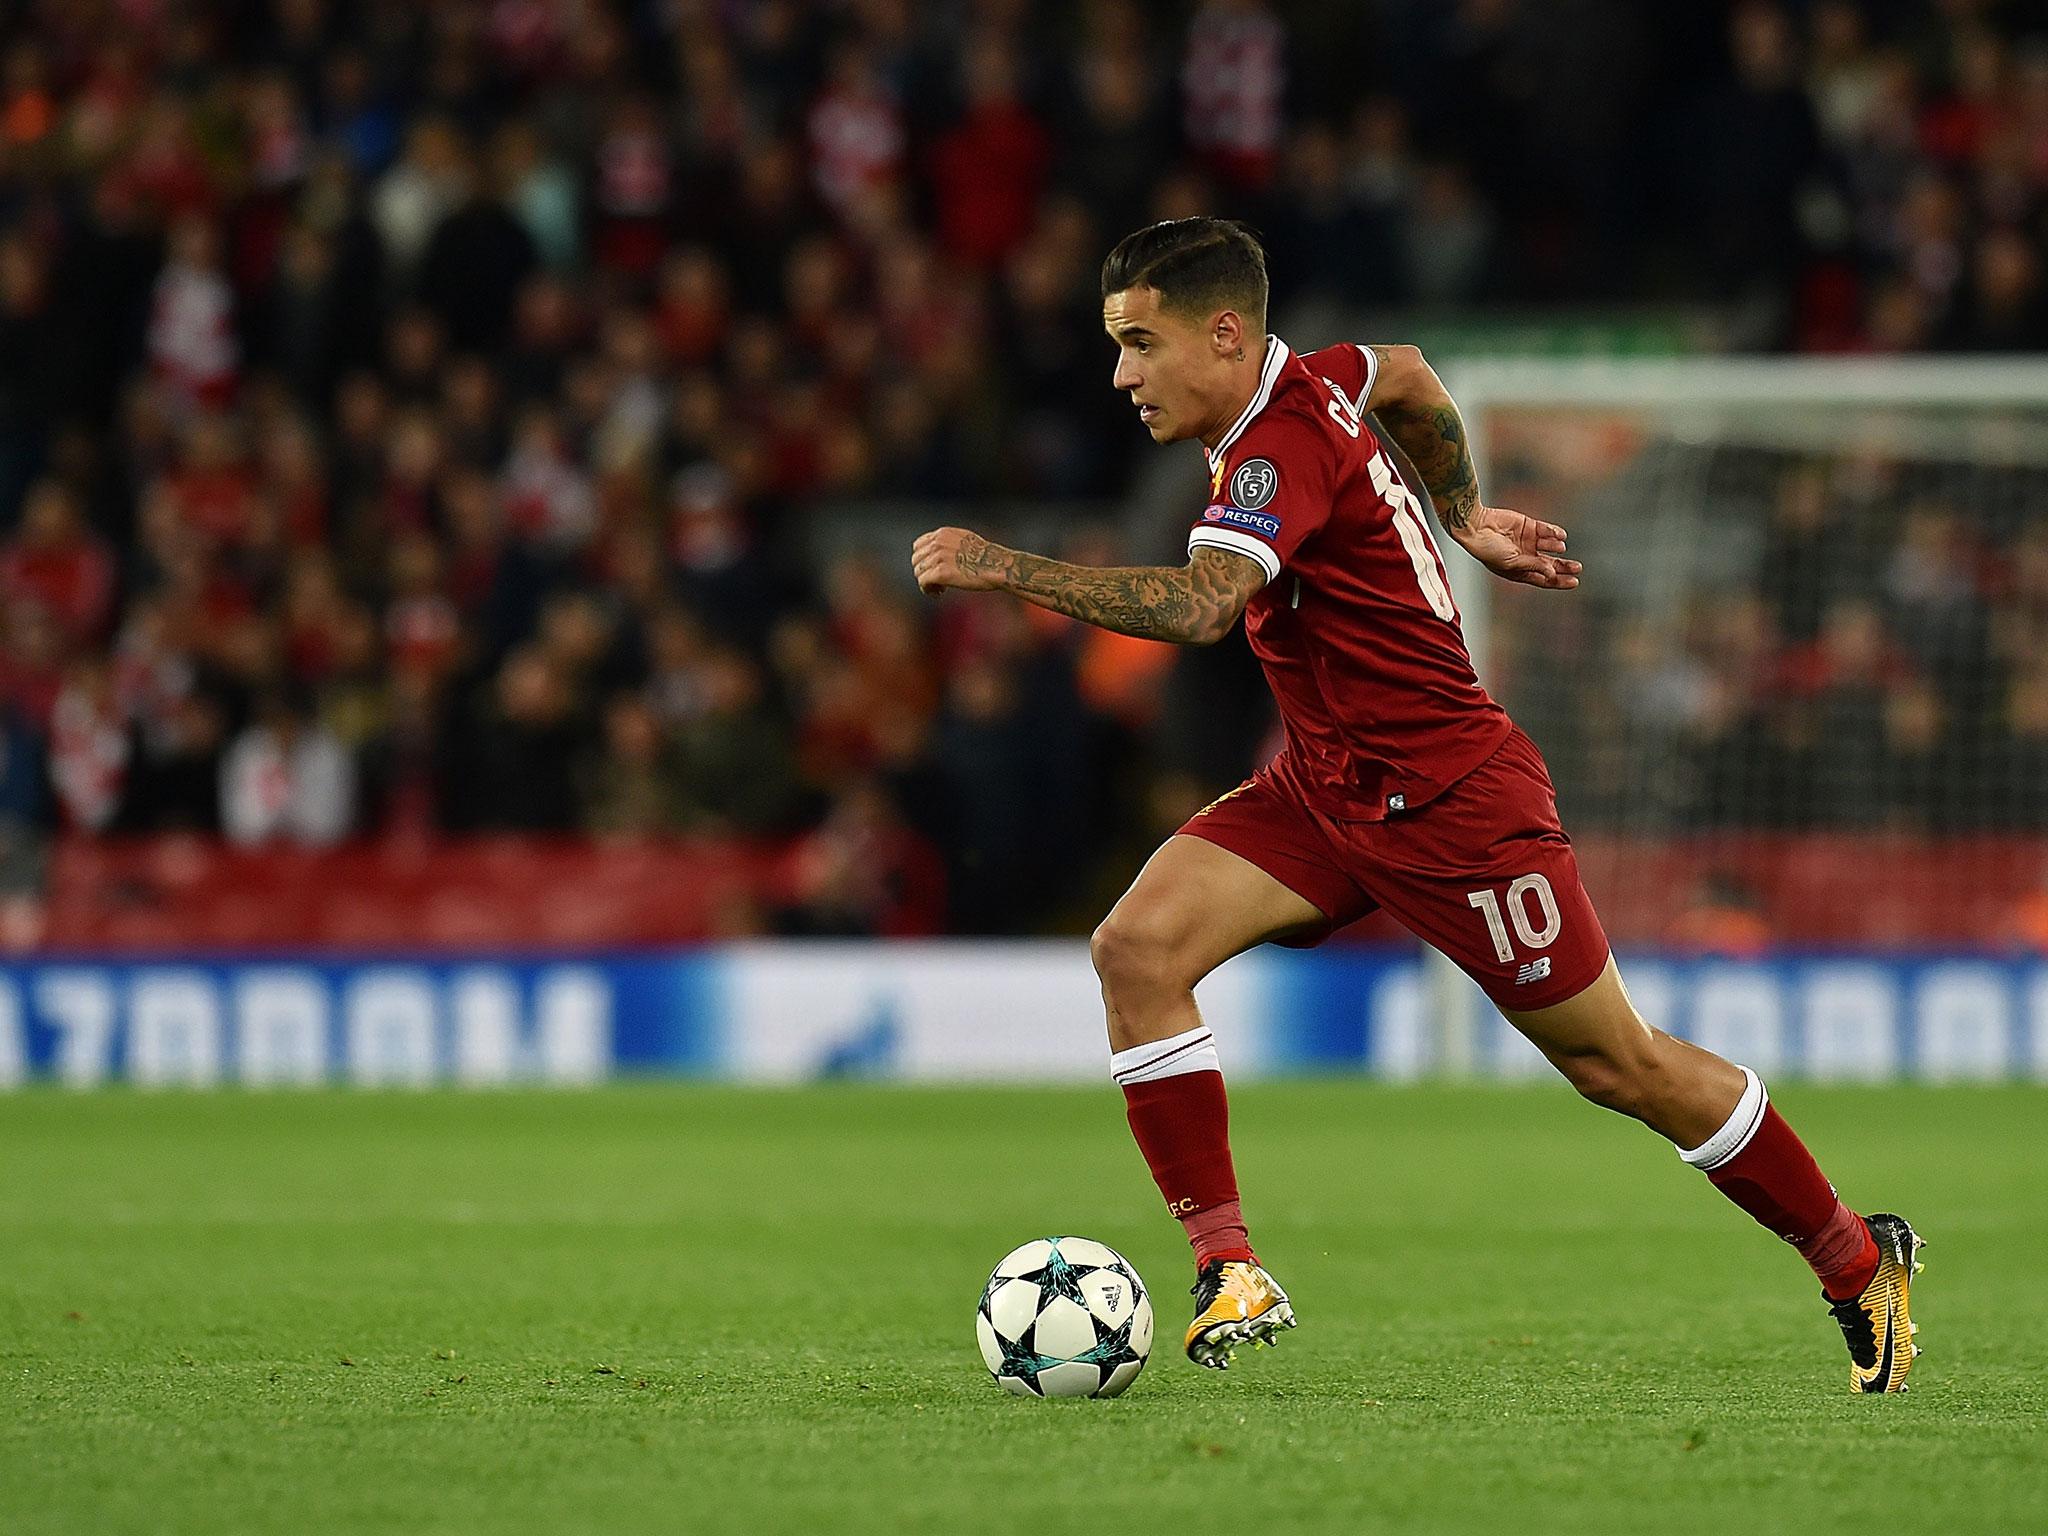 Philippe Coutinho made his first Liverpool appearance of the season on Wednesday night